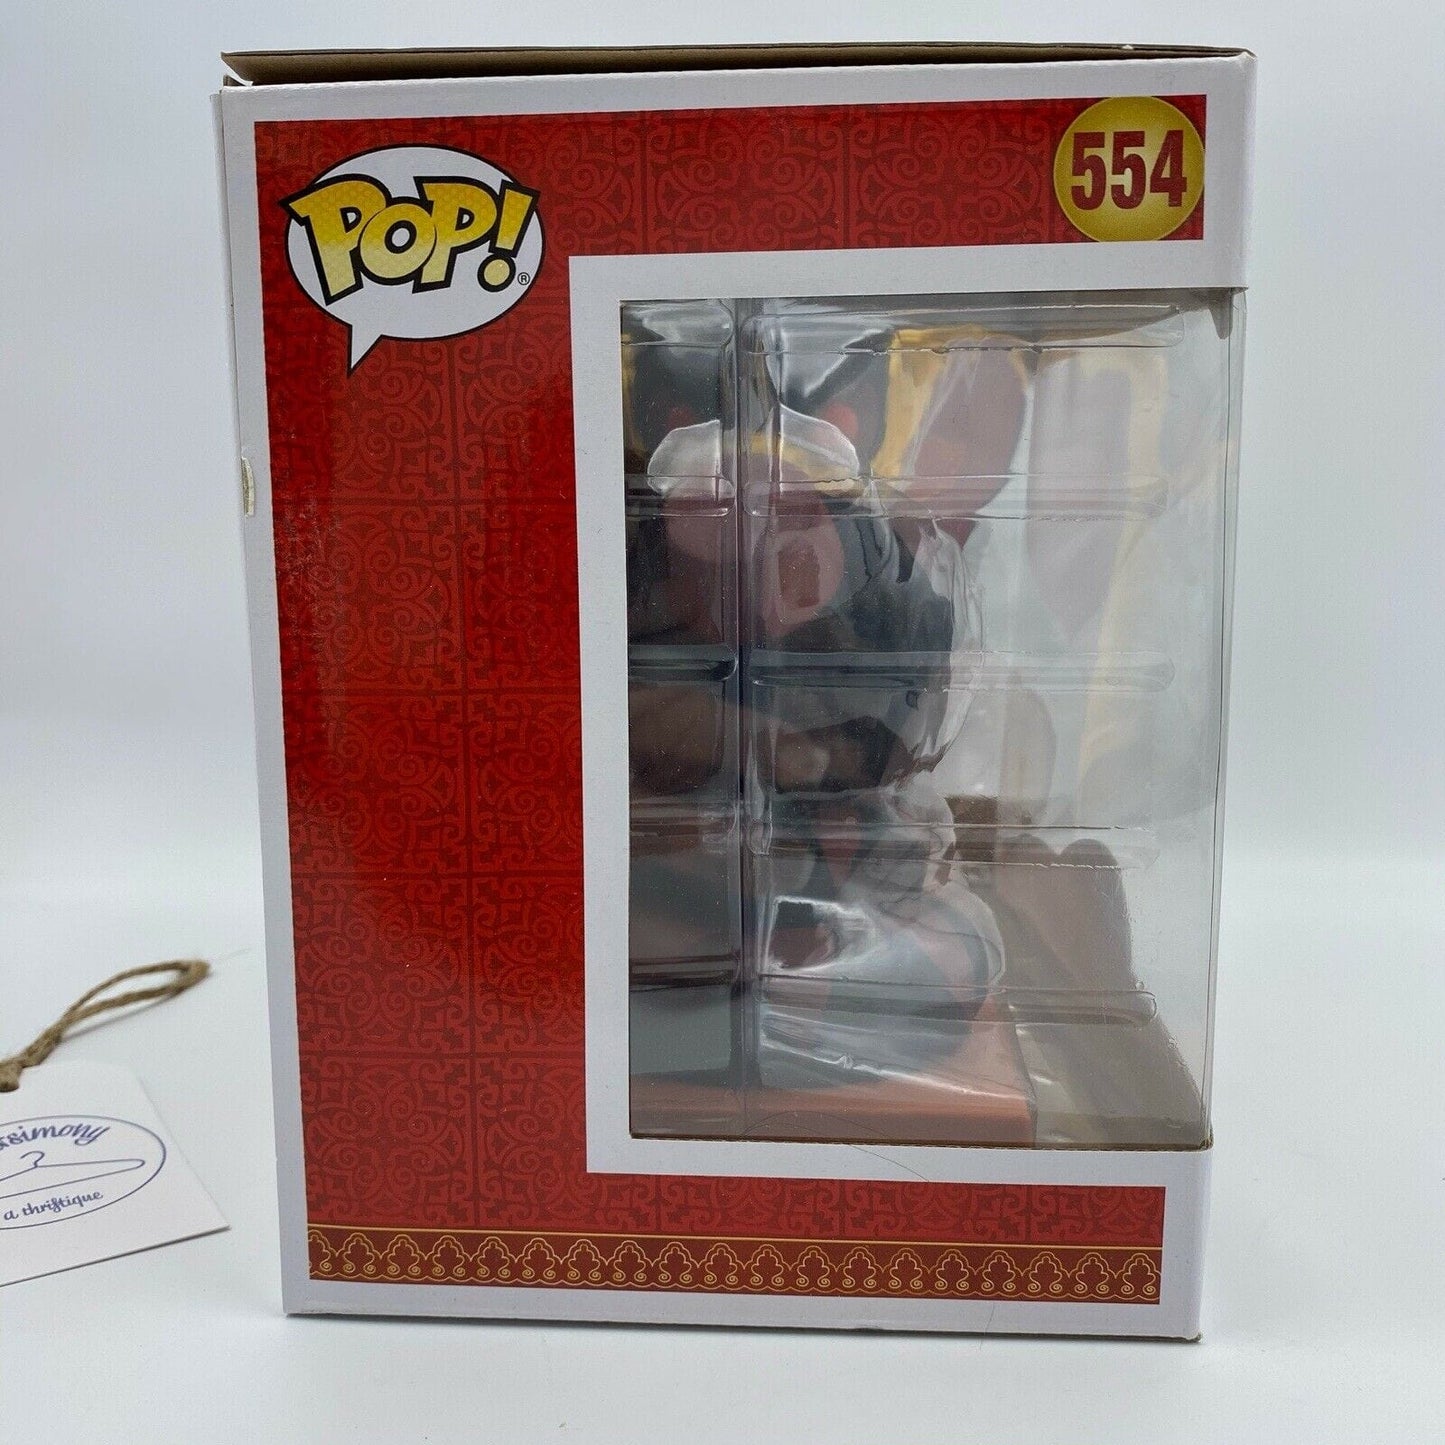 Funko Pop! Movie Moments: Aladdin: Jafar As The Serpent Hot Topic Exclusive #554